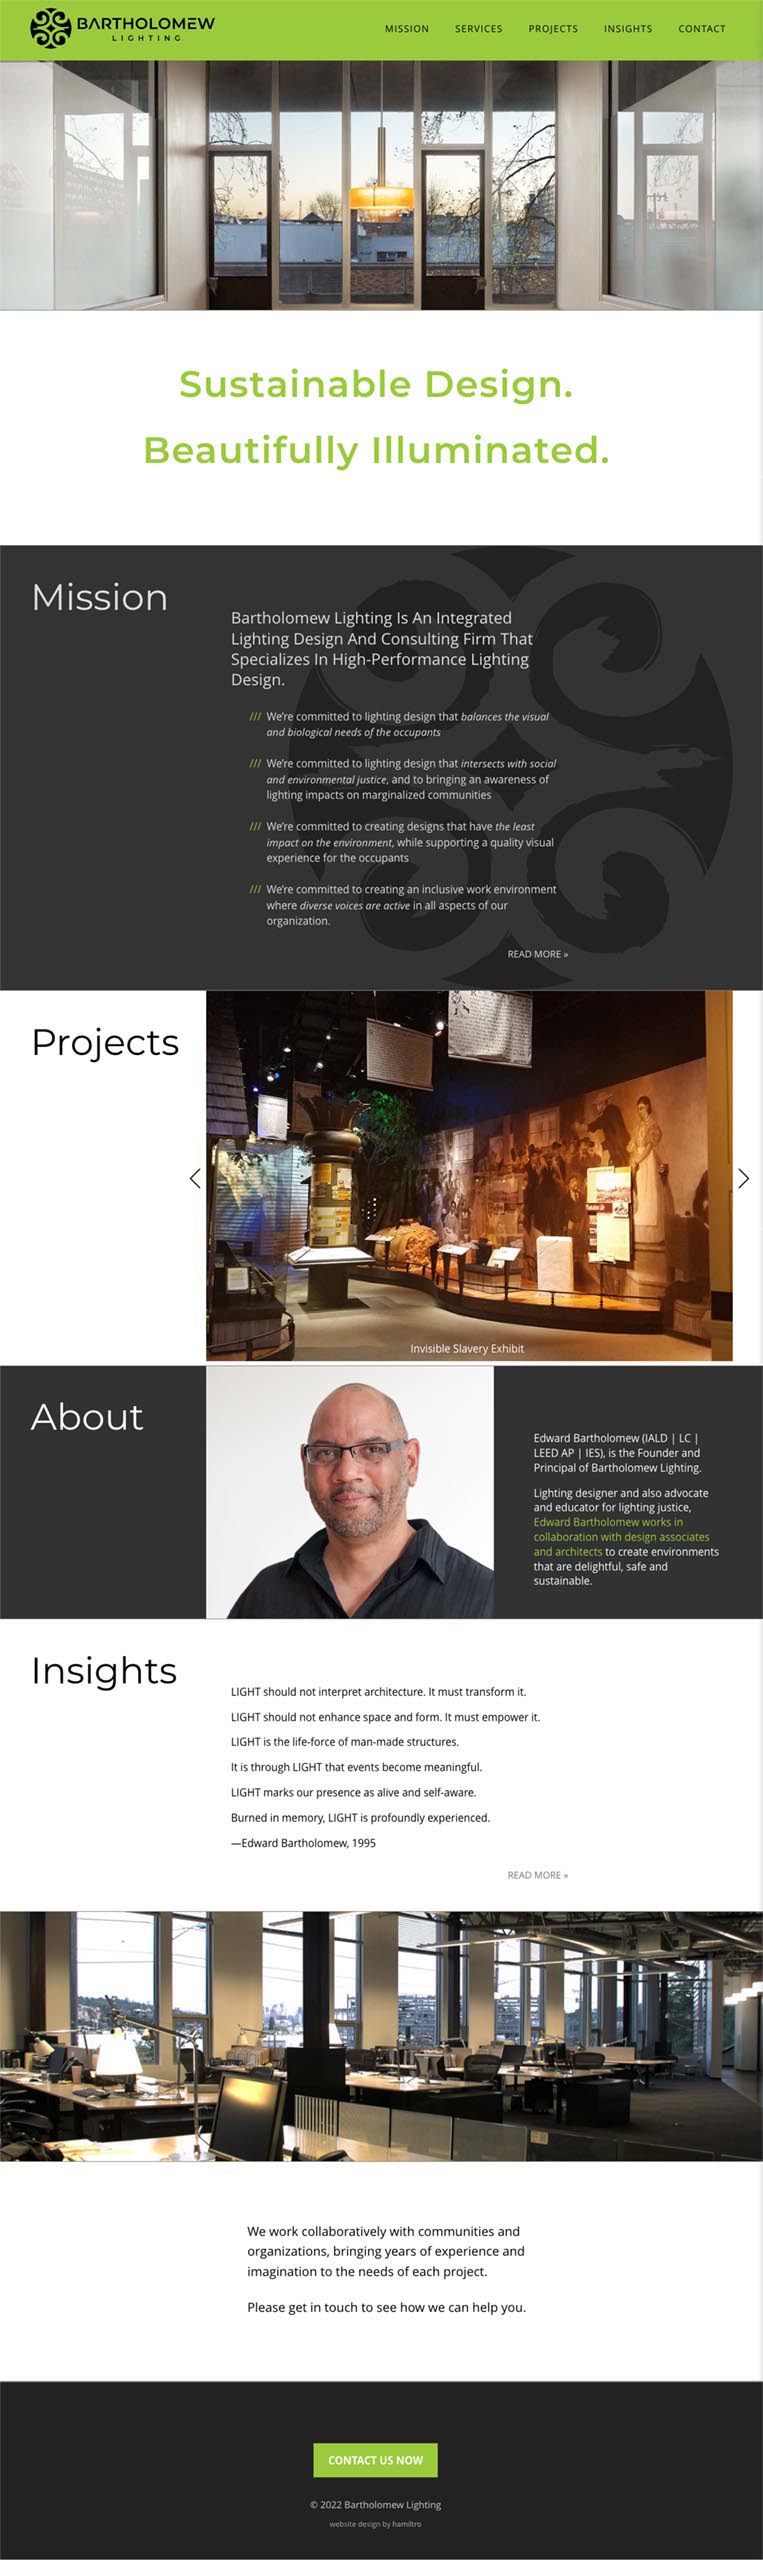 Website design for a lighting designer whose work features sustainability and social justice. The long-scrolling homepage features an image of the designer's work at the top, followed by a branding statement, a mission statement, a carousel of images of recent projects, a biographical introduction and insights. The general effect is clean and contemporary.